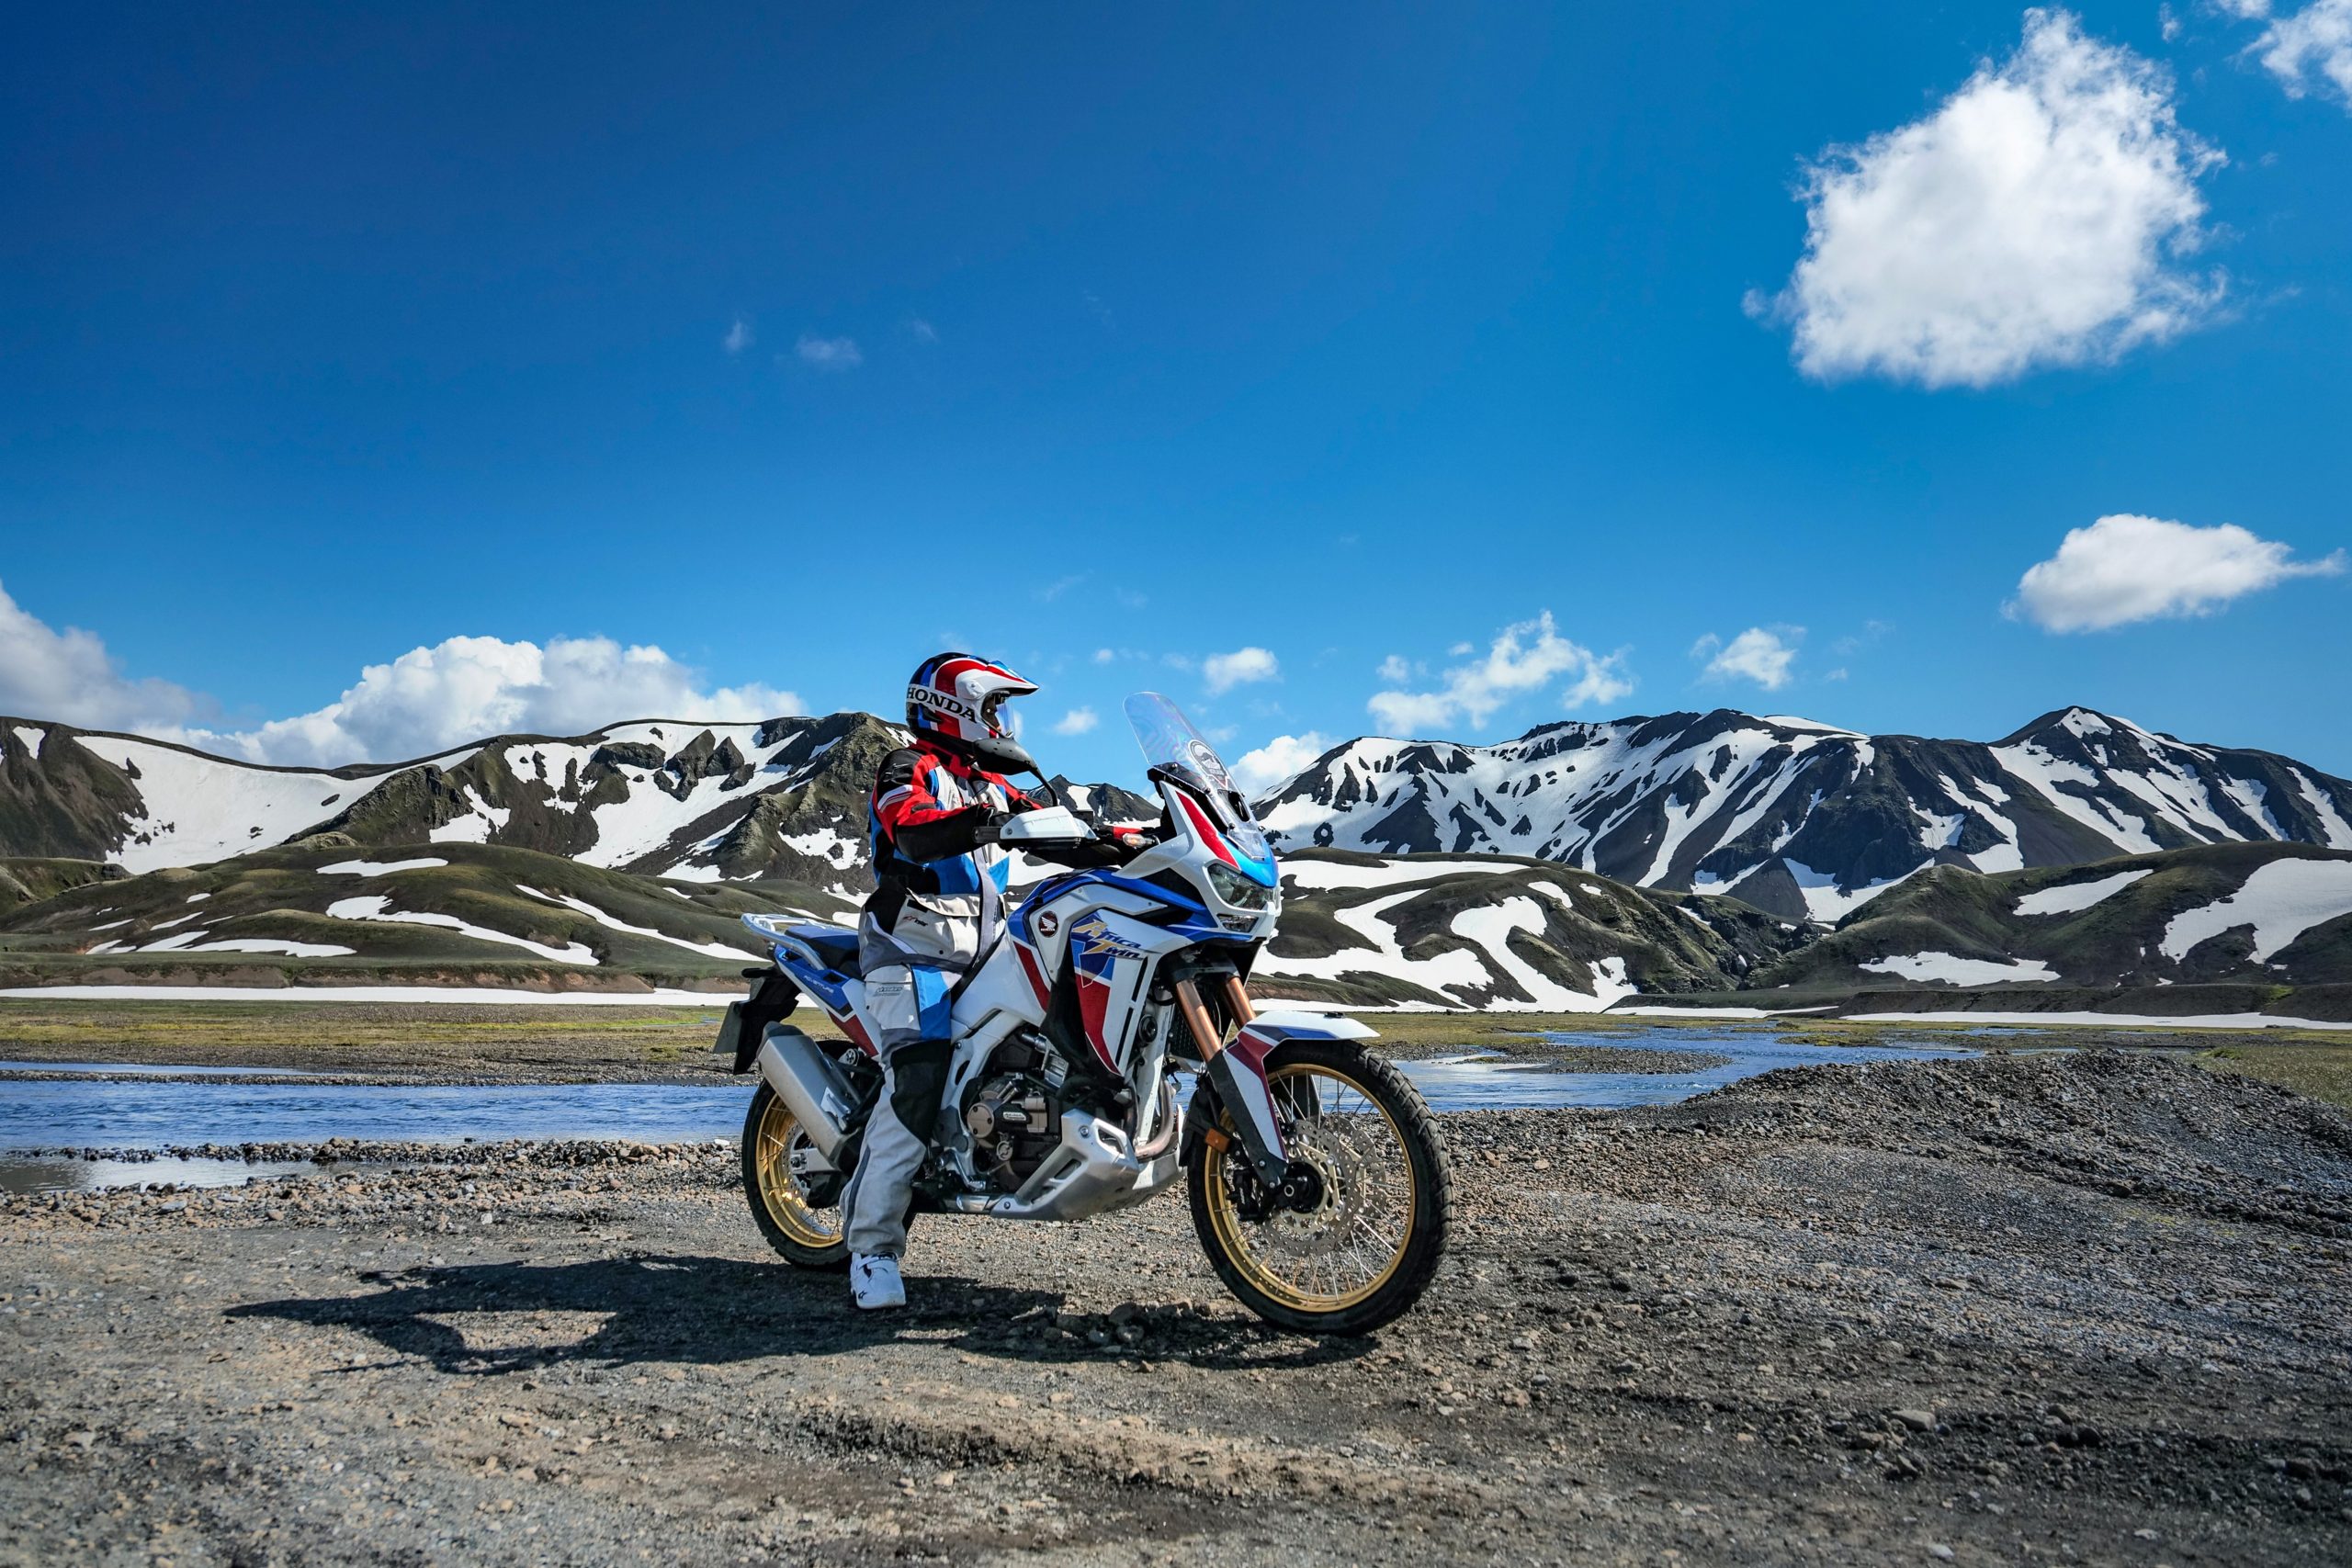 305037 The Honda Africa Twin Heads To Iceland For The Third Adventure Roads Tour Scaled